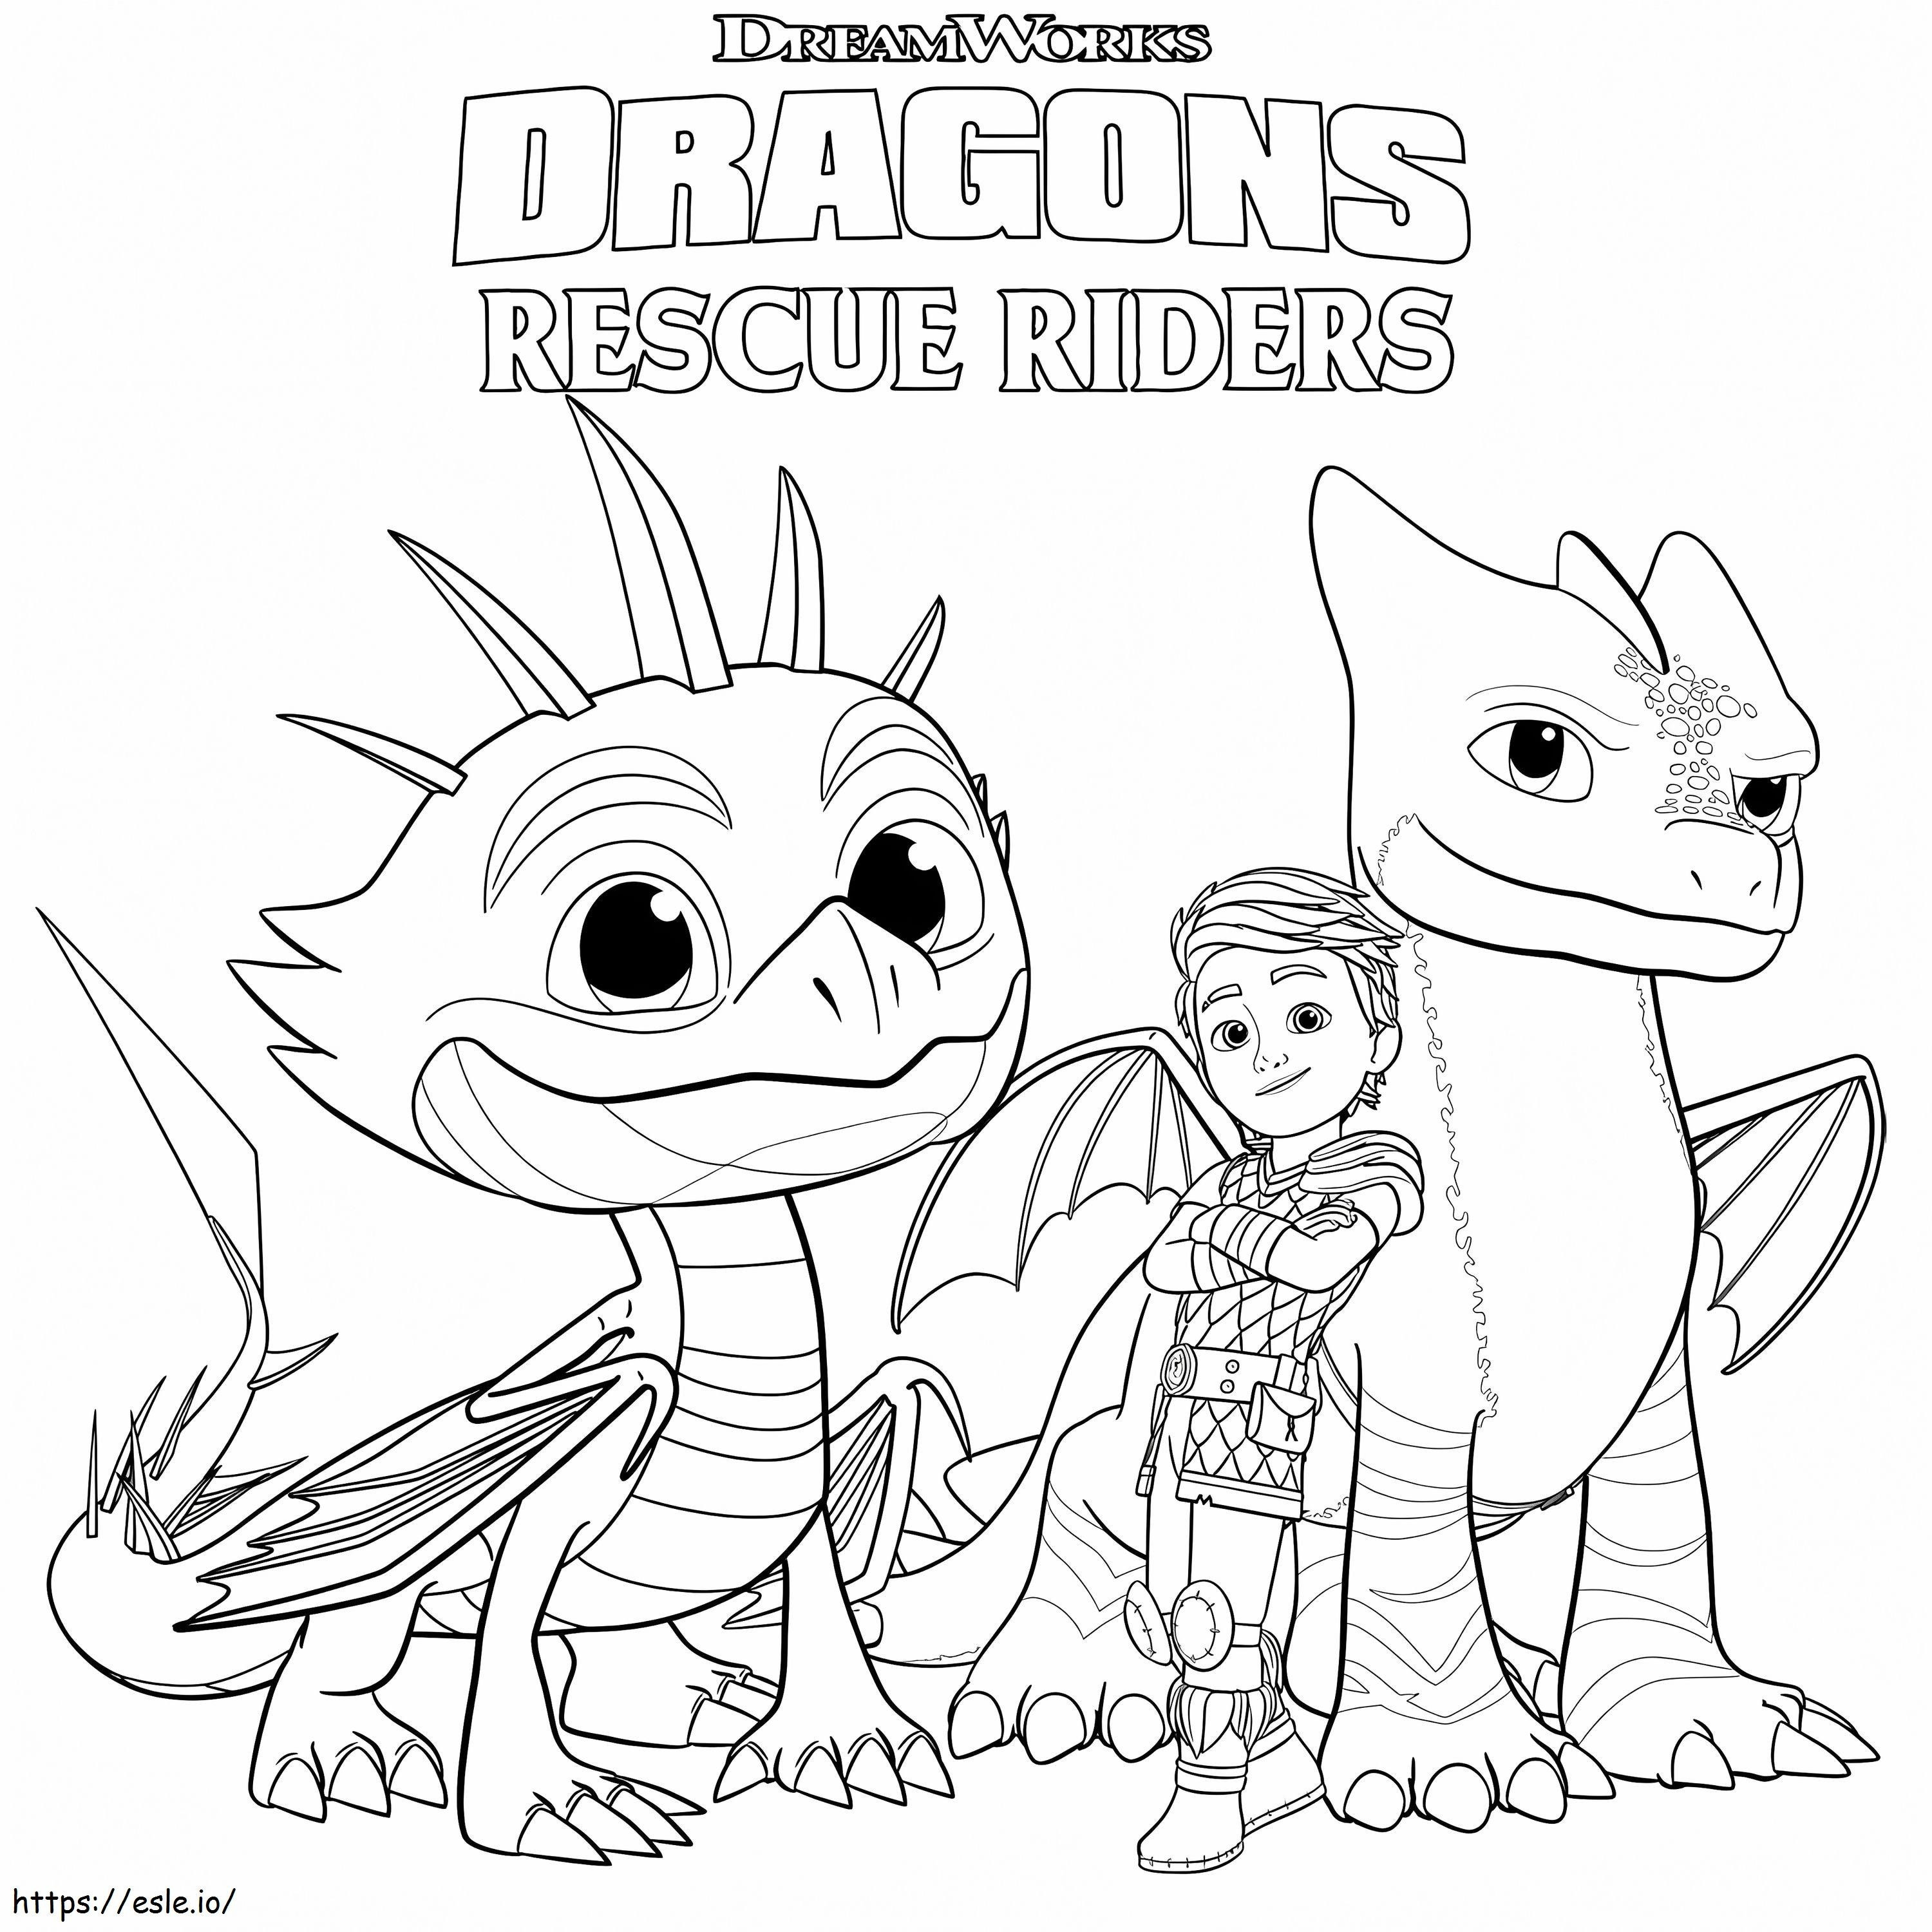 Dragons Rescue Riders Printable coloring page